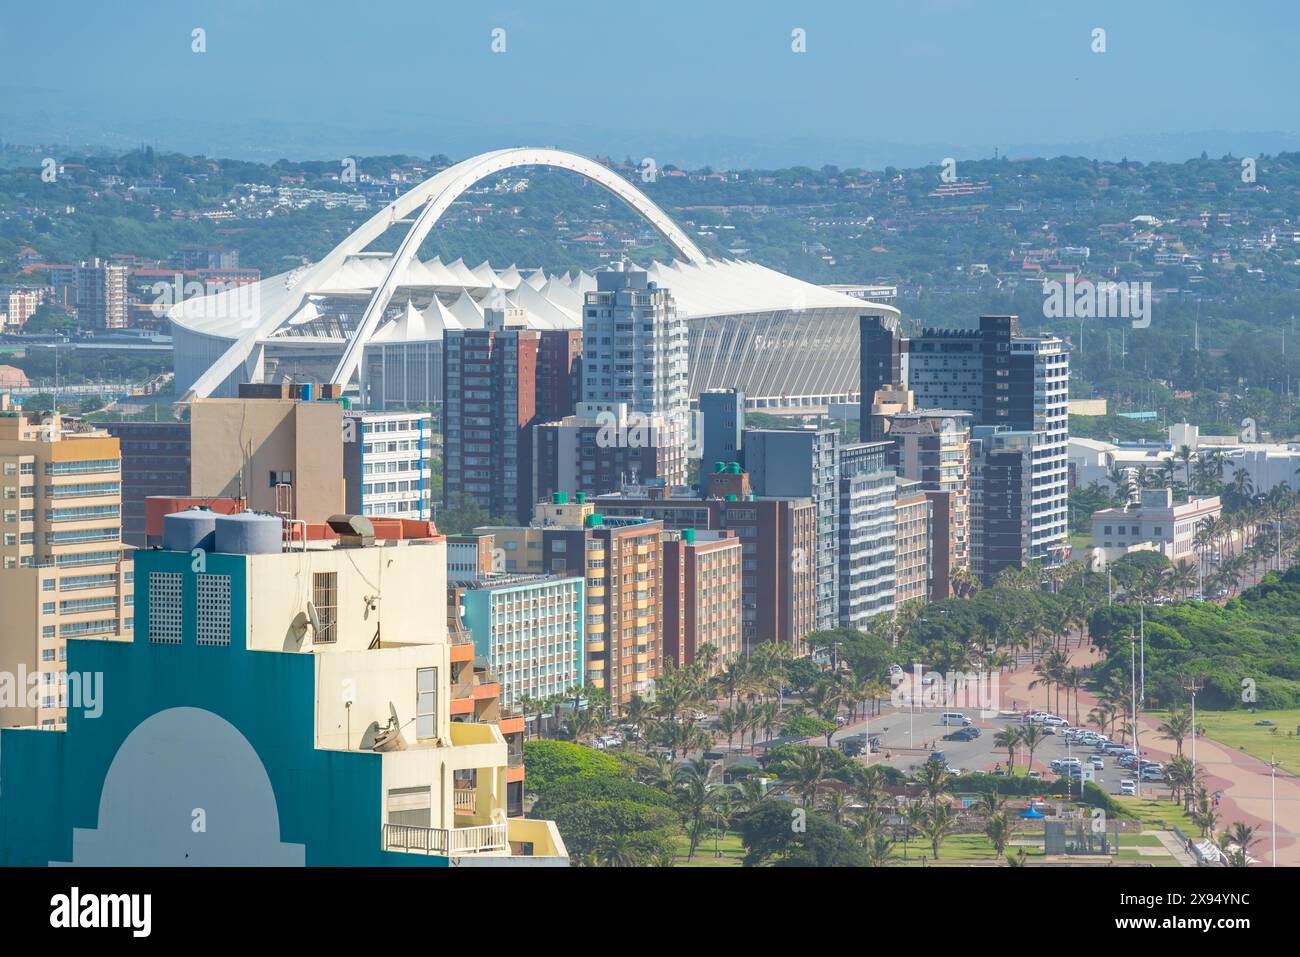 Elevated view of Moses Mabhida Stadium and hotels, Durban, KwaZulu-Natal Province, South Africa, Africa Stock Photo